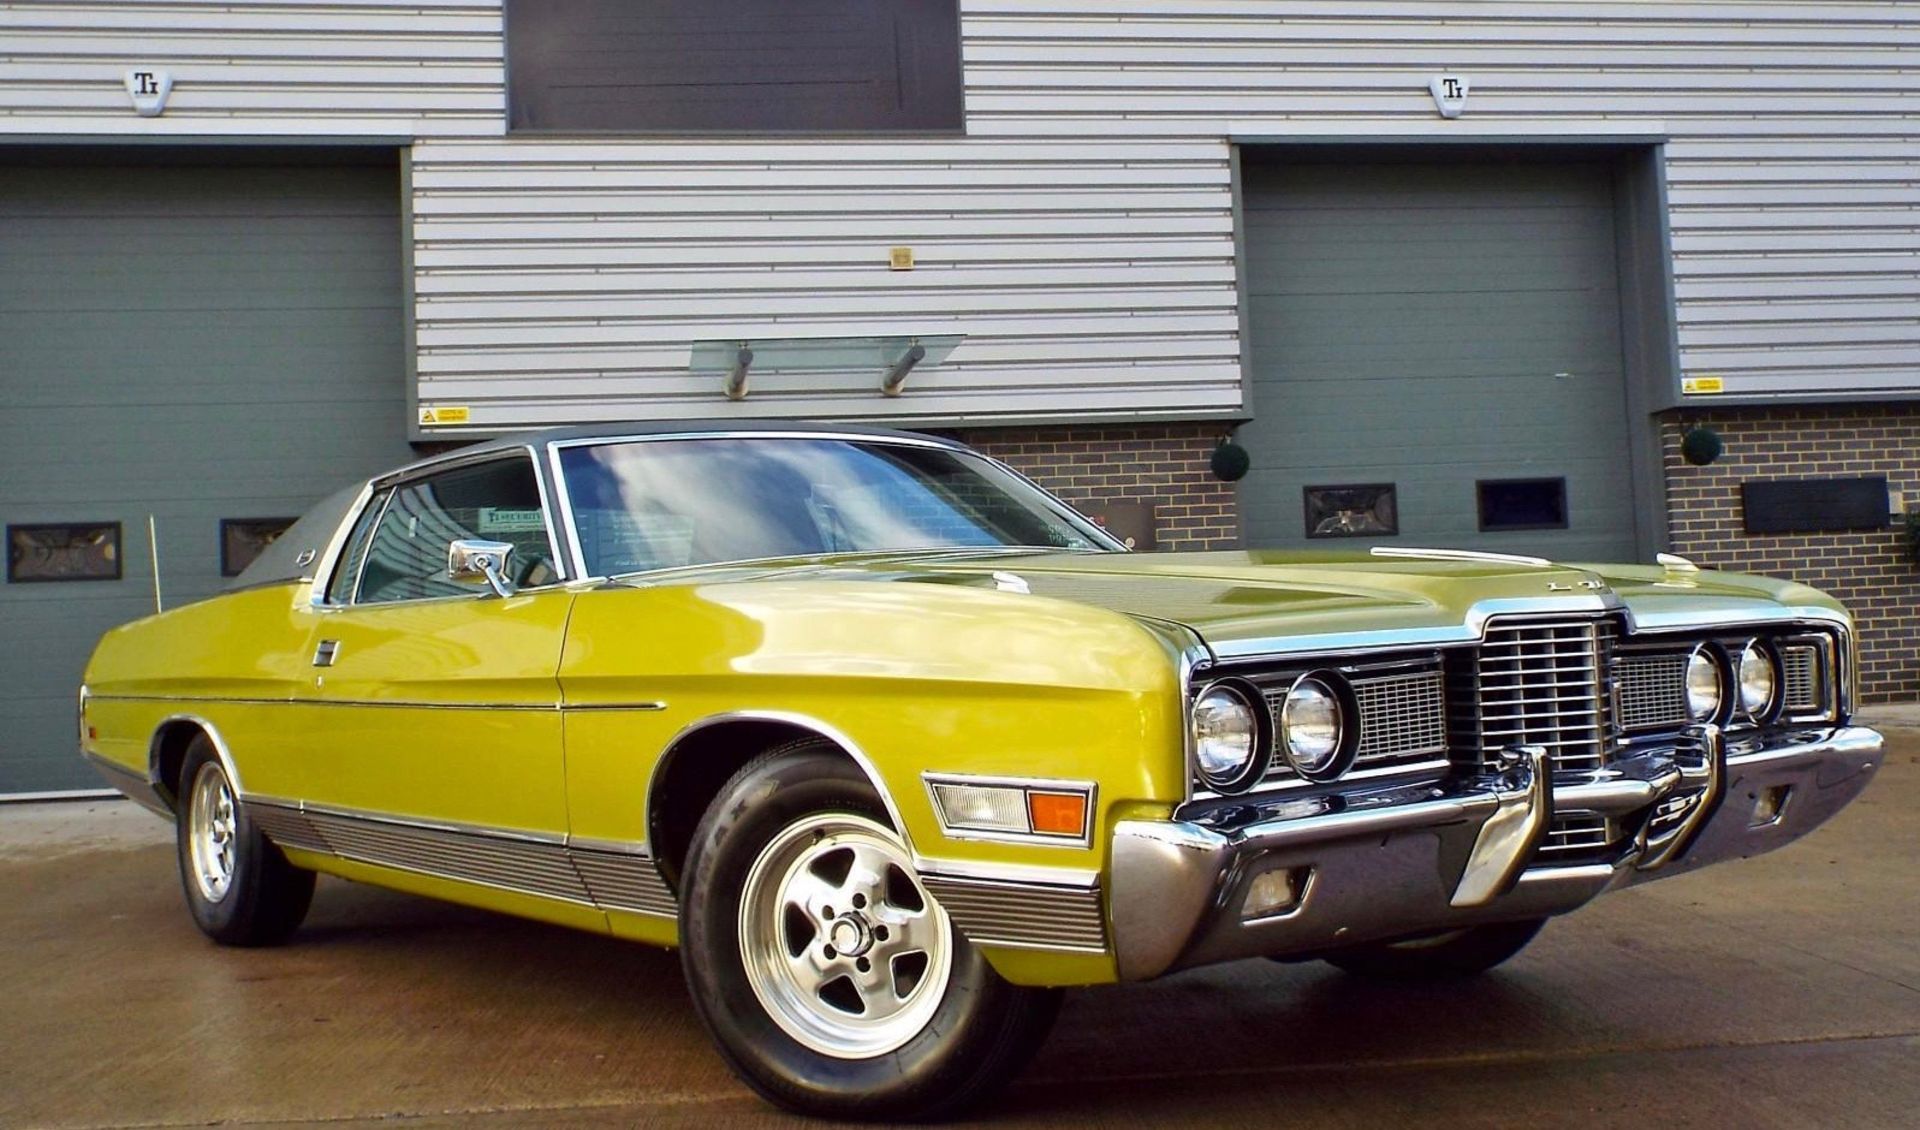 1972 Ford Galaxie 5.8 V8 Ltd Pure Original Example - Image 5 of 13